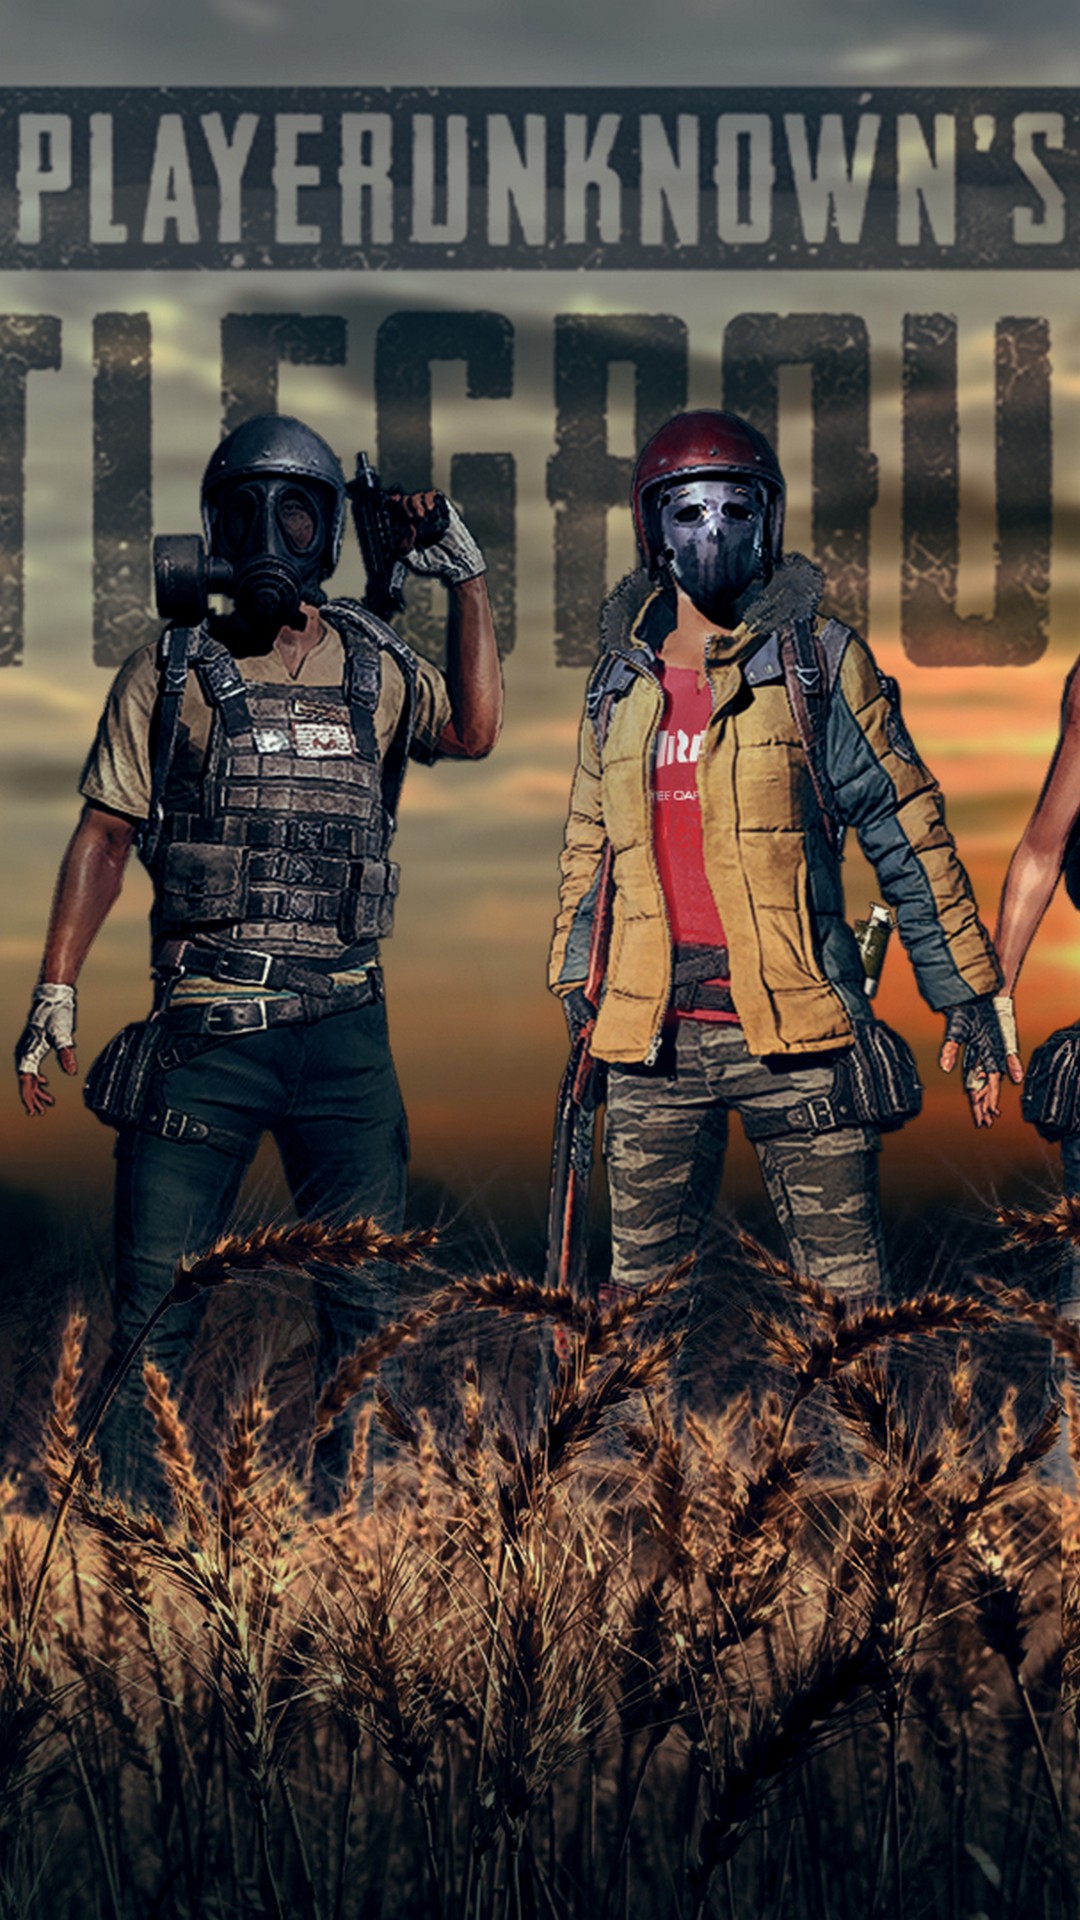 Wallpaper iPhone PUBG Xbox One Update with image resolution 1080x1920 pixel. You can make this wallpaper for your iPhone 5, 6, 7, 8, X backgrounds, Mobile Screensaver, or iPad Lock Screen